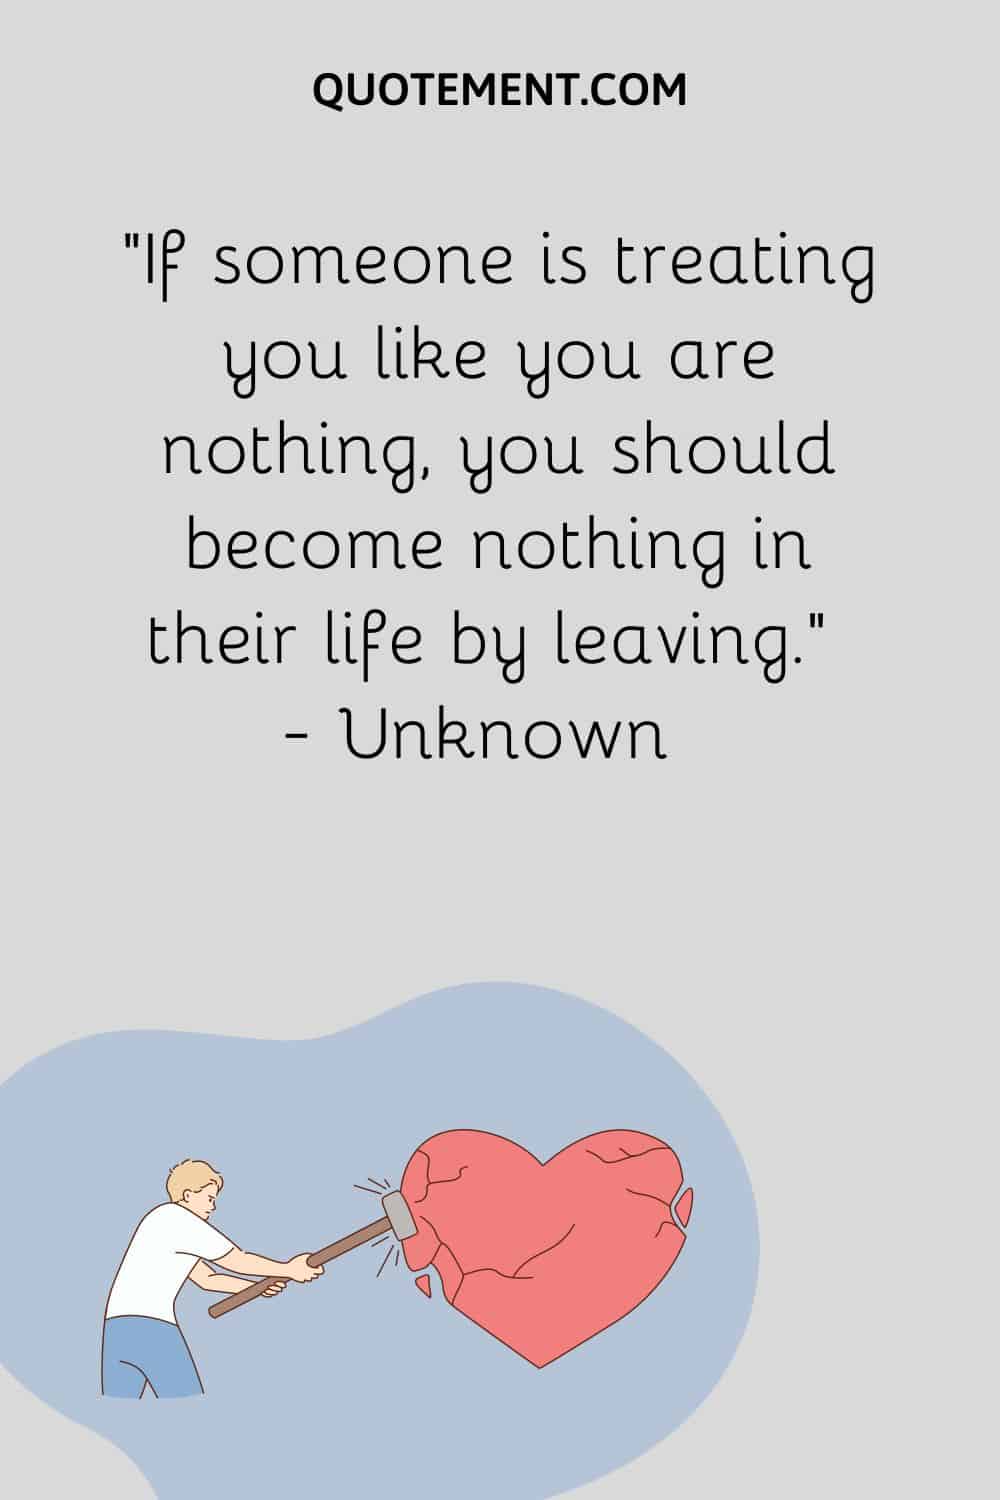 If someone is treating you like you are nothing, you should become nothing in their life by leaving